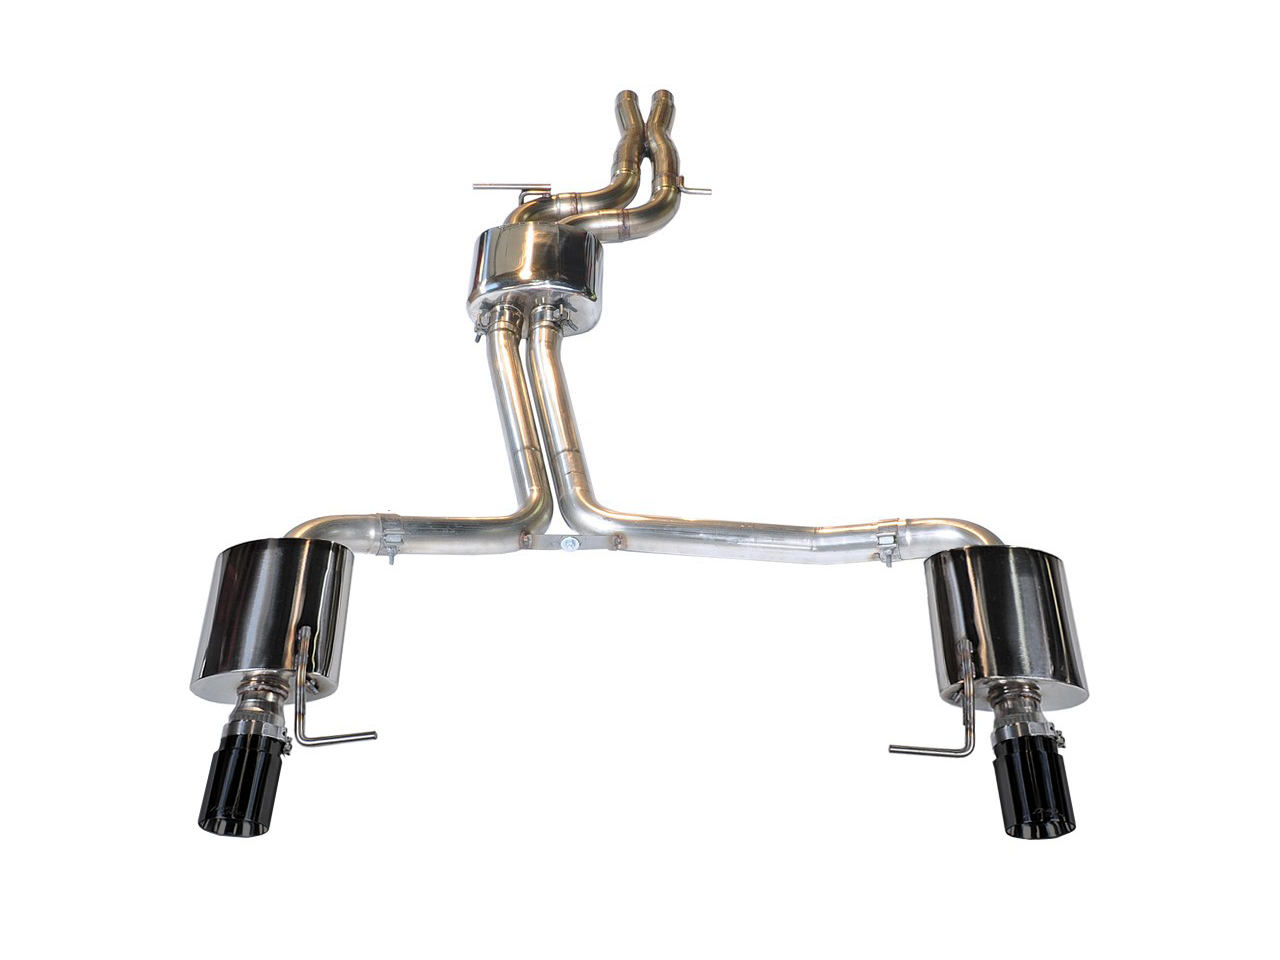 AWE Touring Edition Exhaust Suite for Audi C7 A7